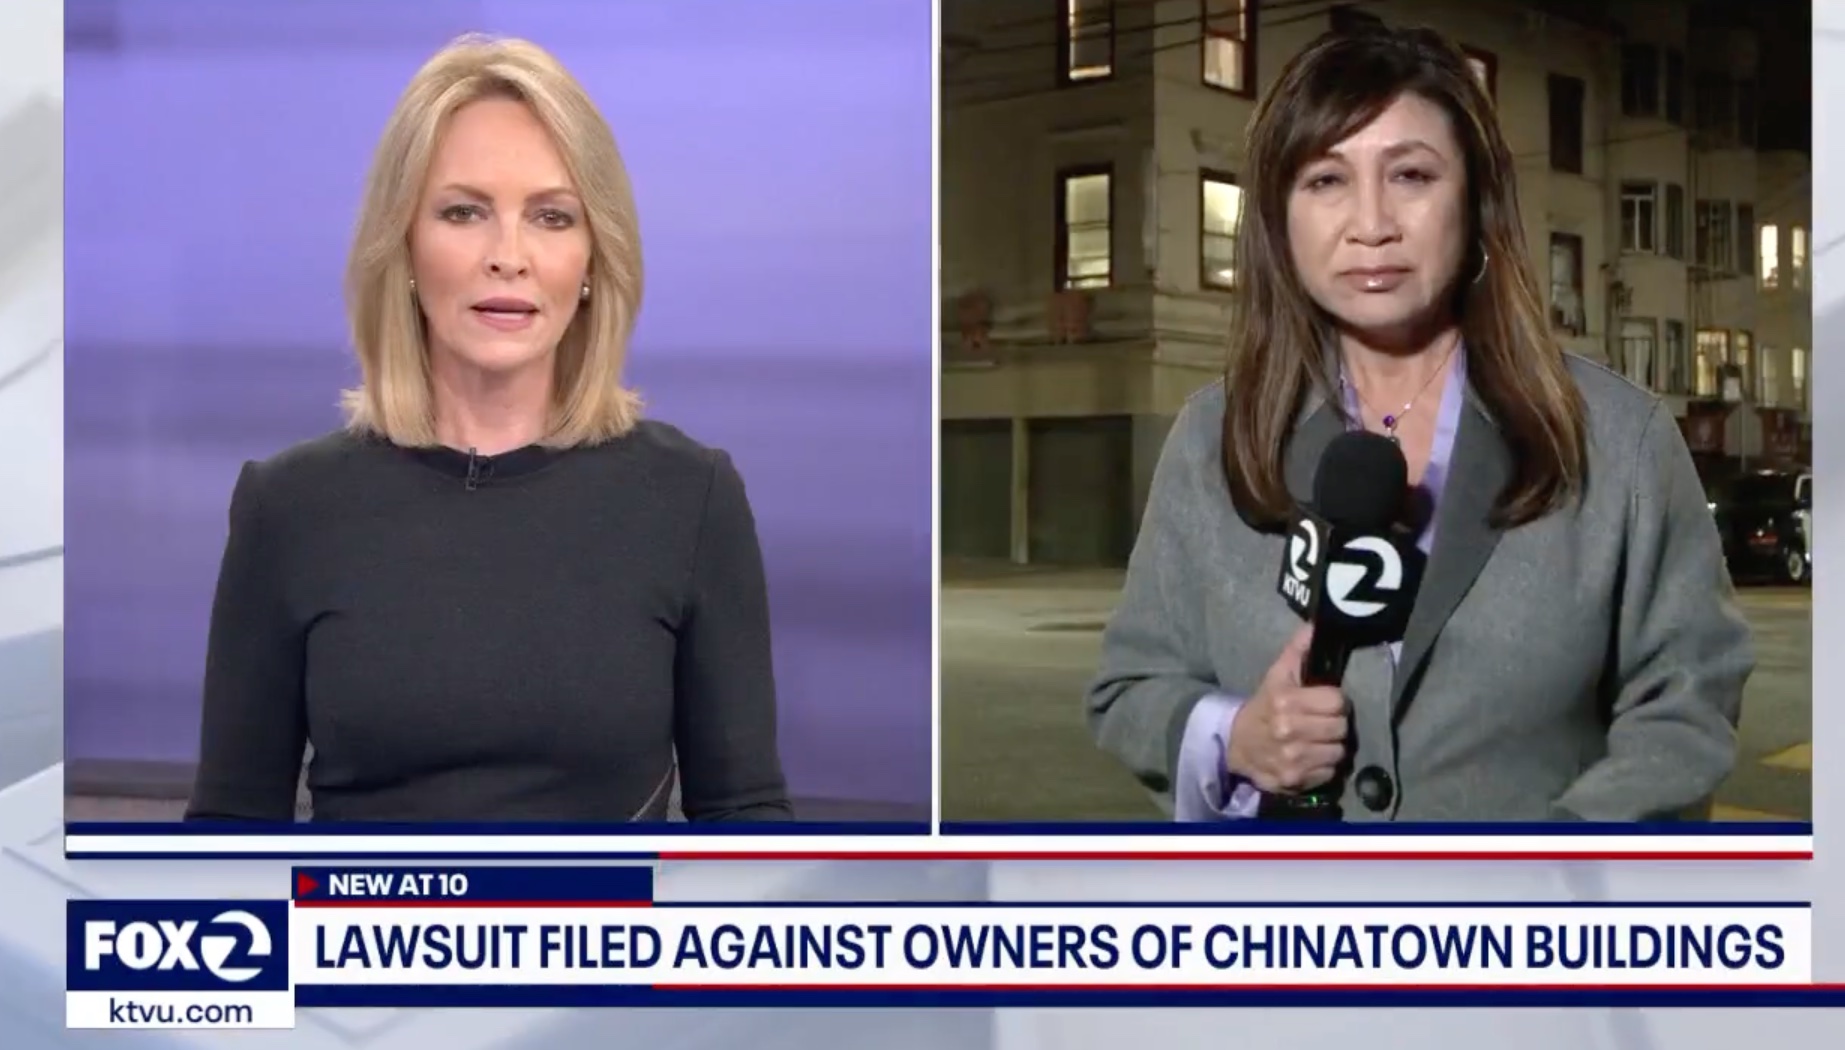 Screenshot of a KTUV story titled "Lawsuit filed against owners of Chinatown buildings"